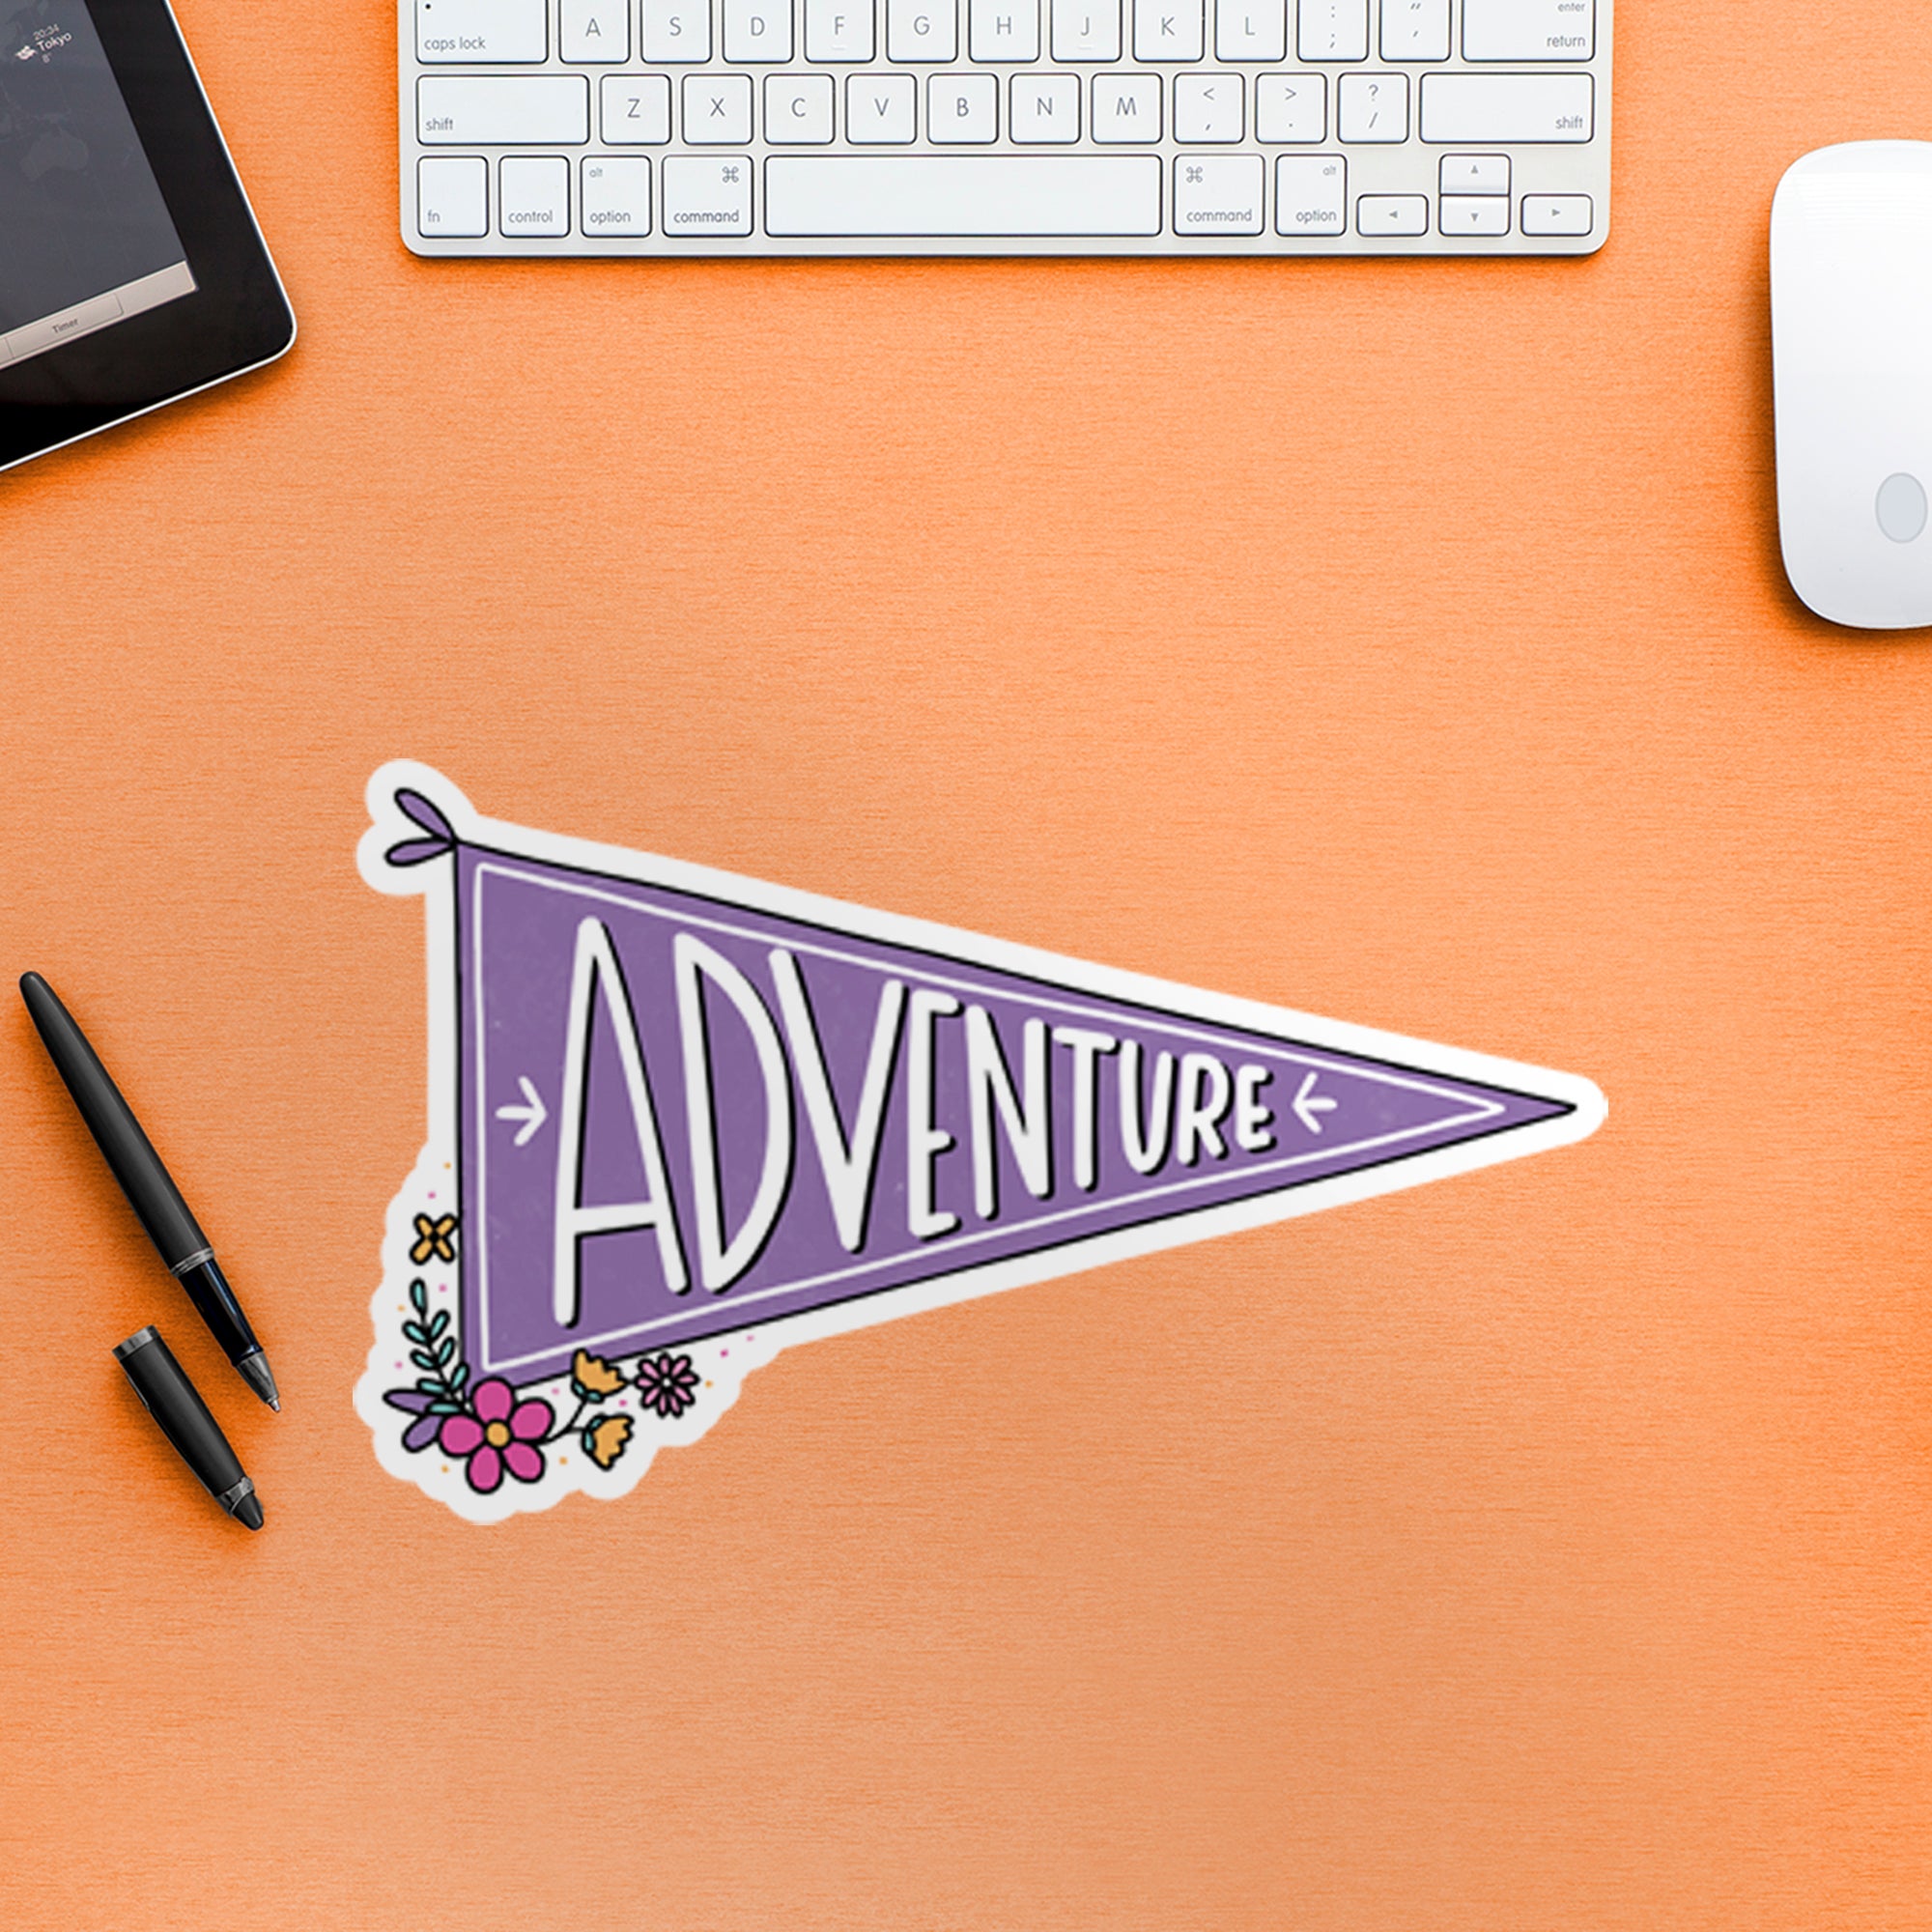 Adventure Flag - Officially Licensed Big Moods Removable Wall Decal Large by Fathead | Vinyl